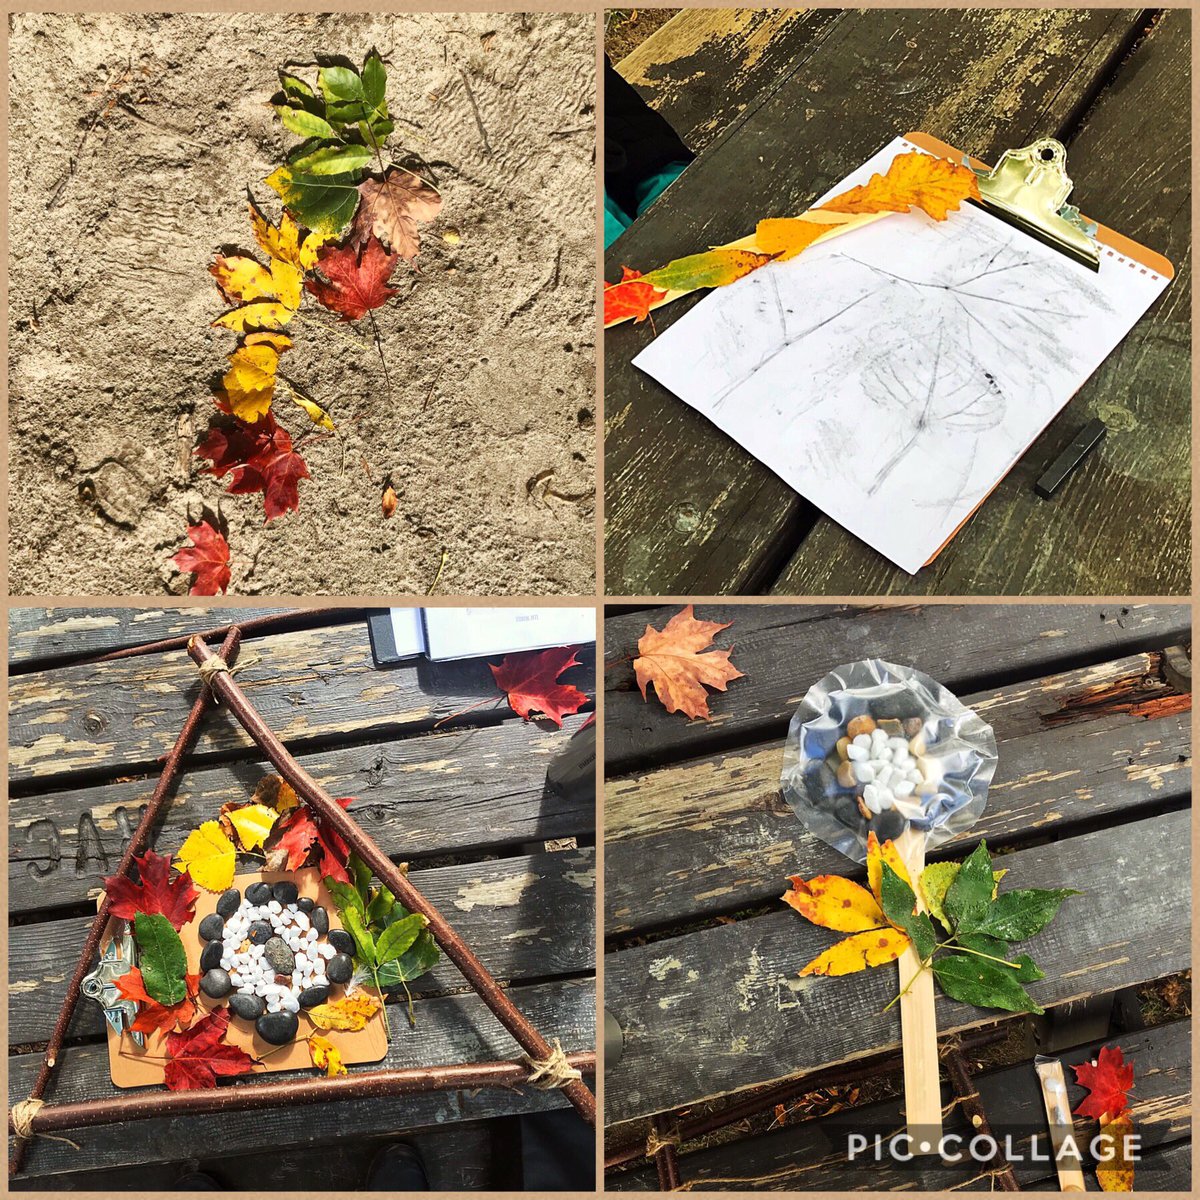 So many wonderful works of art inspired by nature at #ocsbOutdoors today! #thirdteacher #ocsbArts #ocsbEco